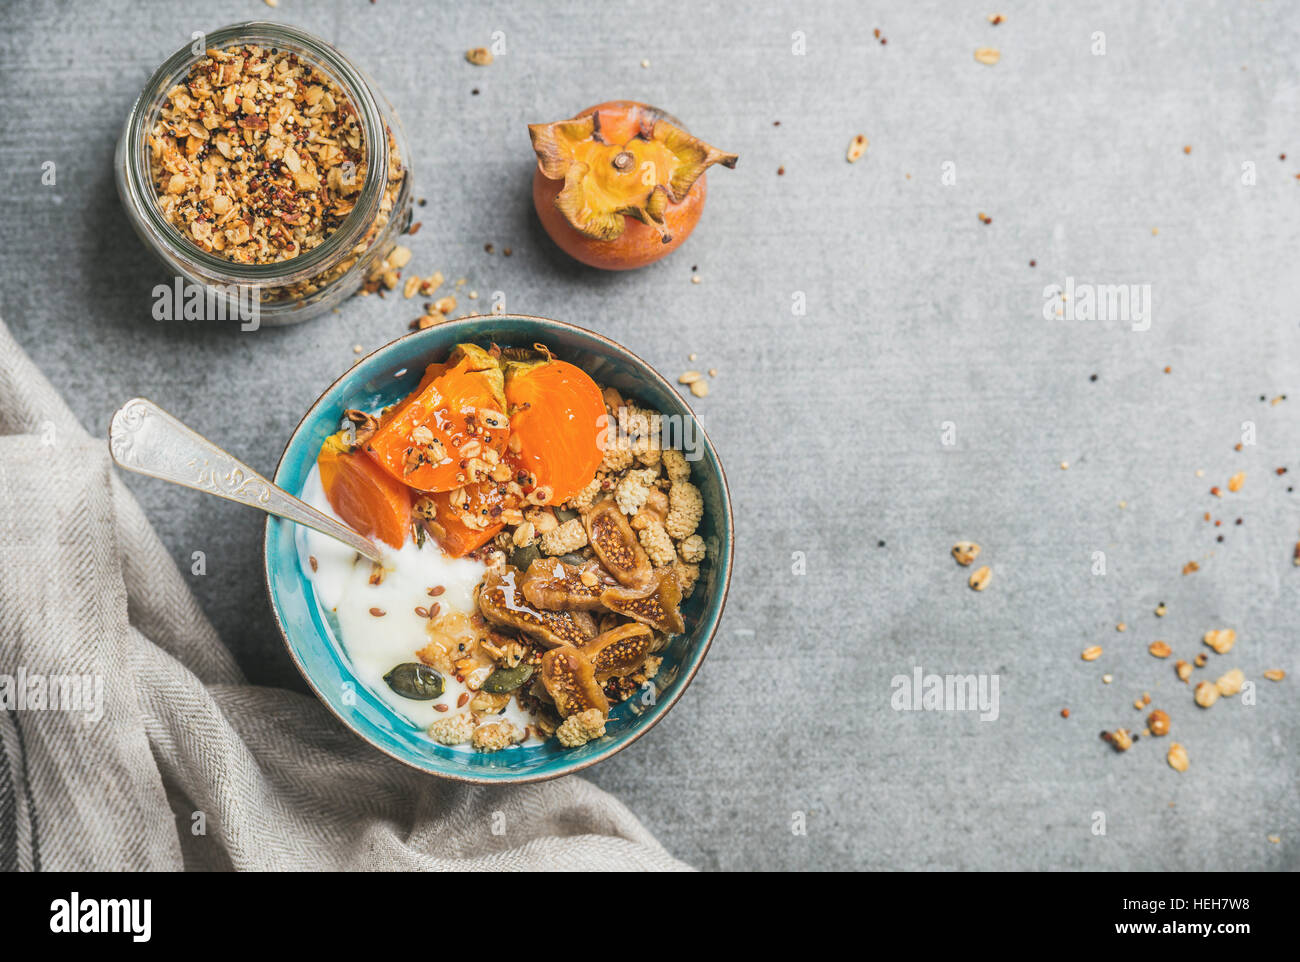 Healthy breakfast concept. Oatmeal, quinoa granola with yogurt, dried fruit, seeds, honey, persimmon in bowl over grey concrete background, top view, Stock Photo